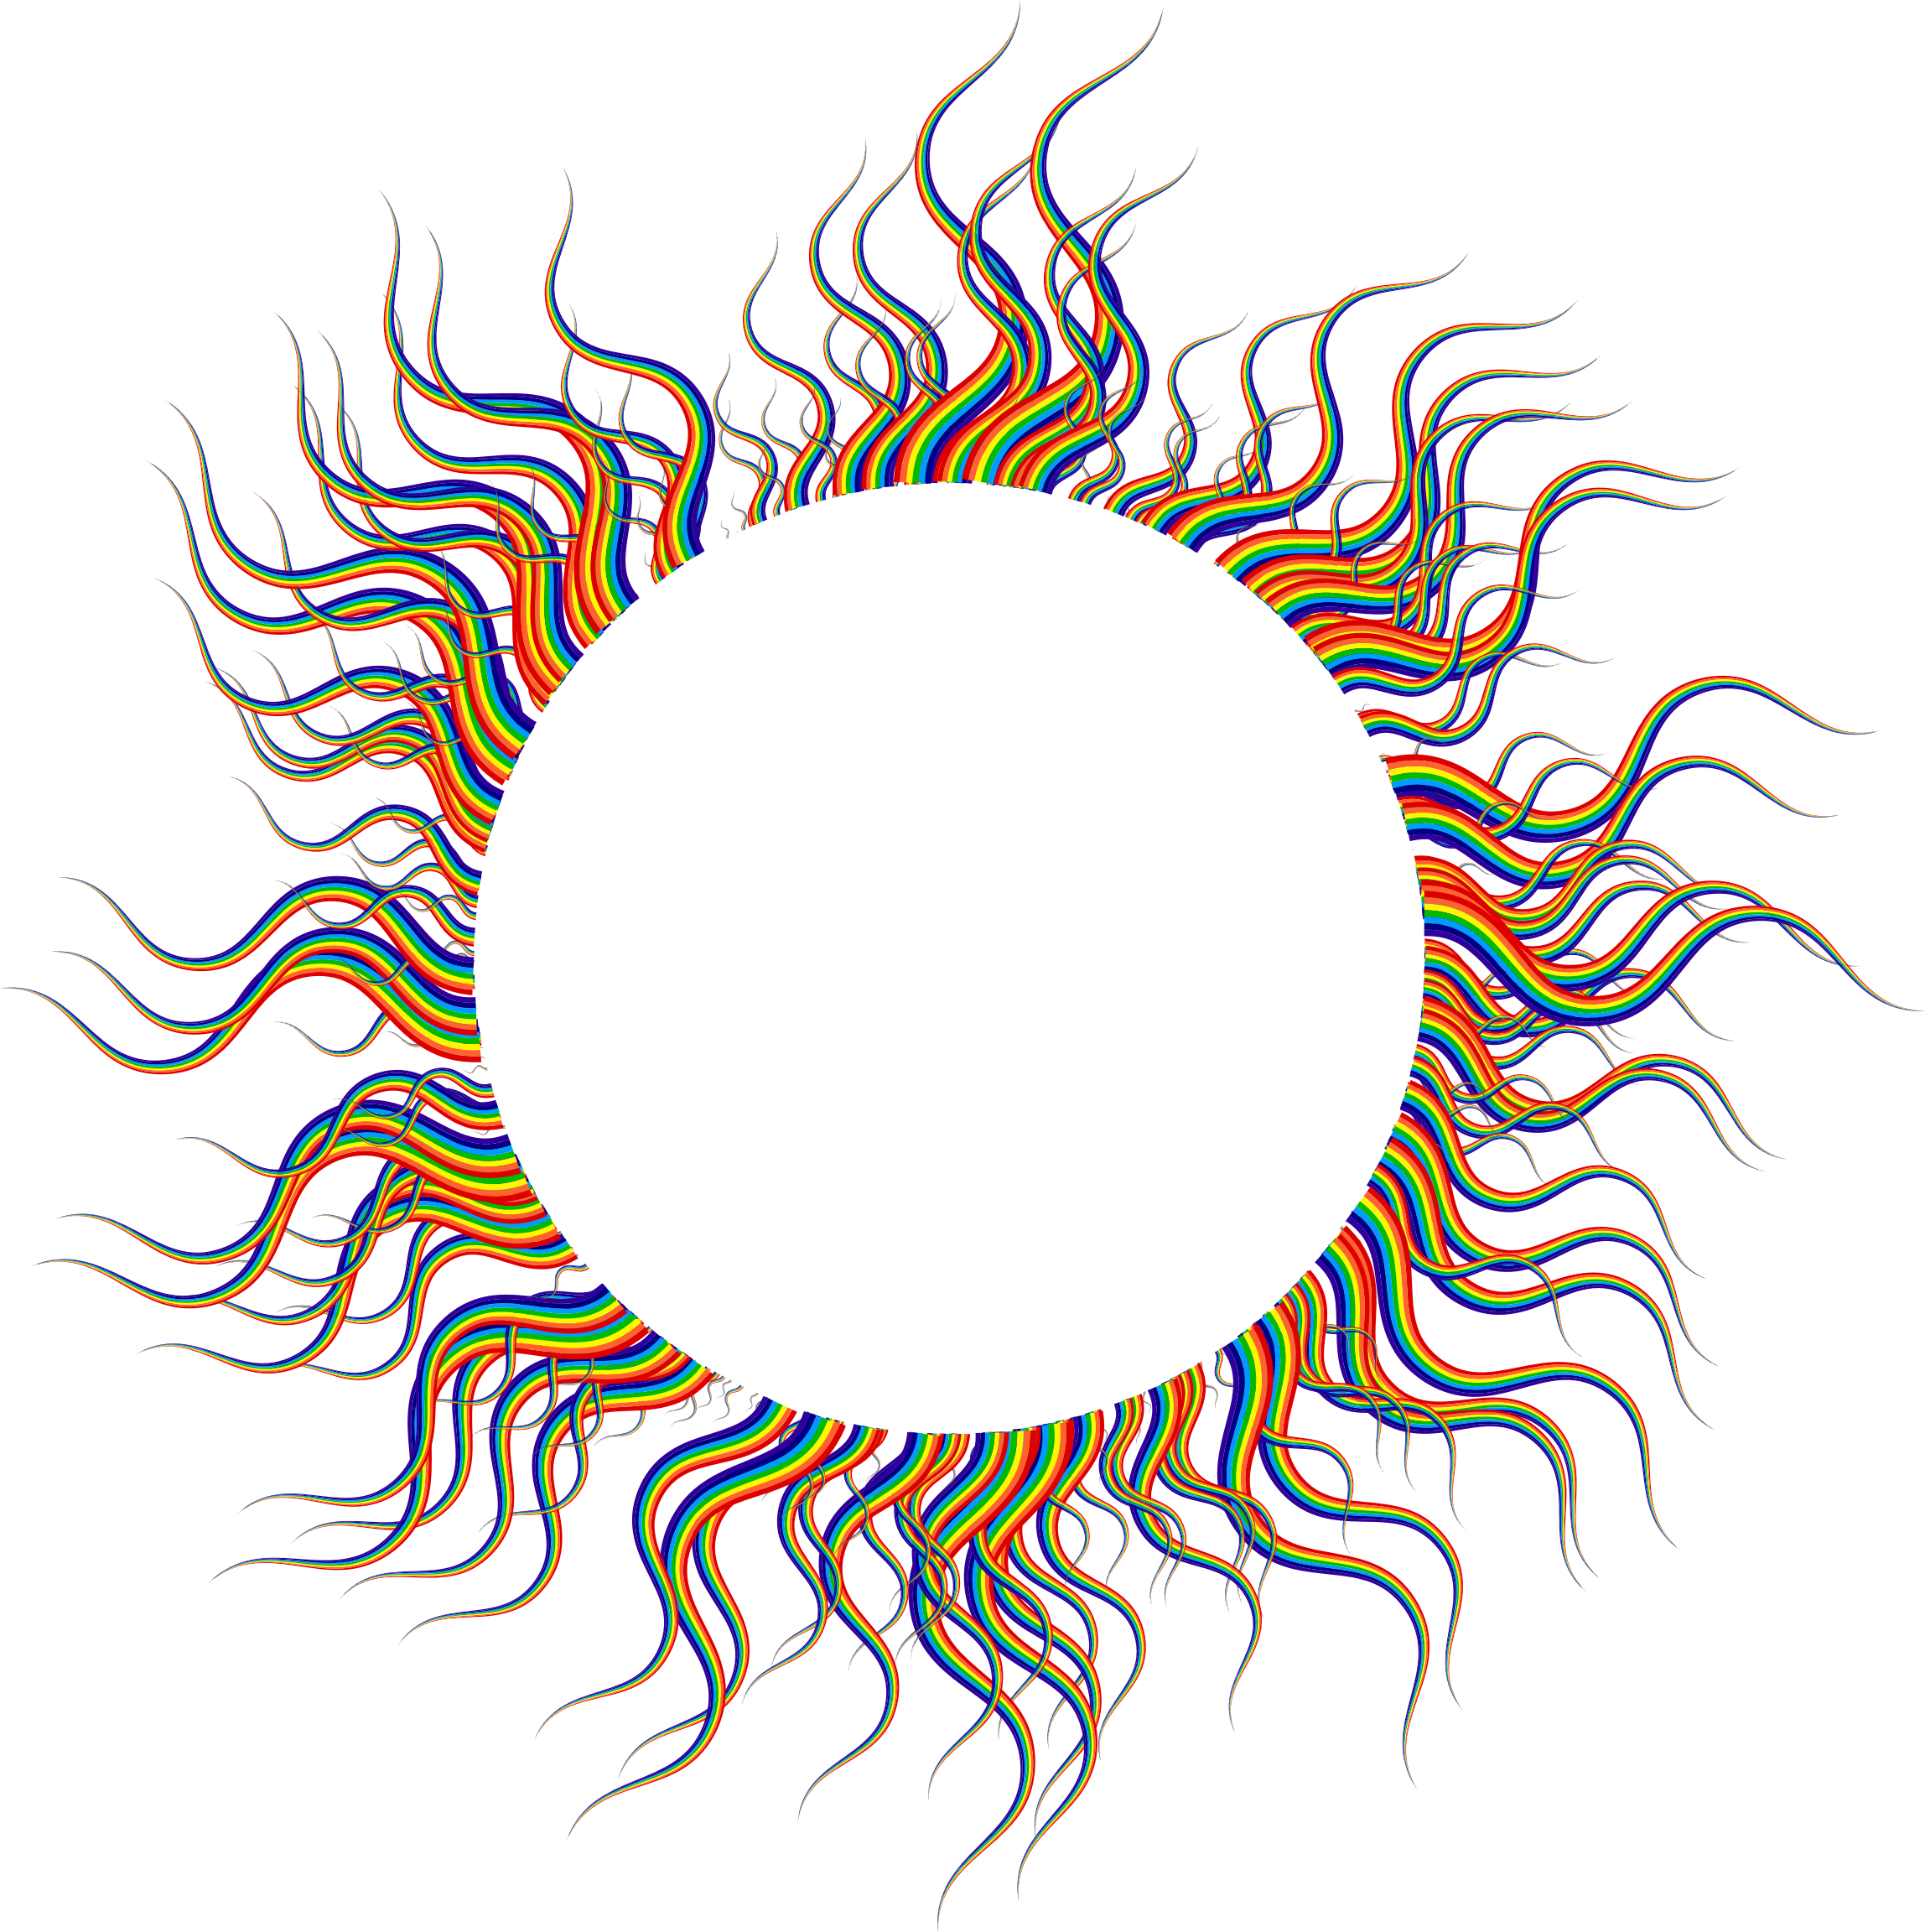 A Circular Object With Colorful Lines